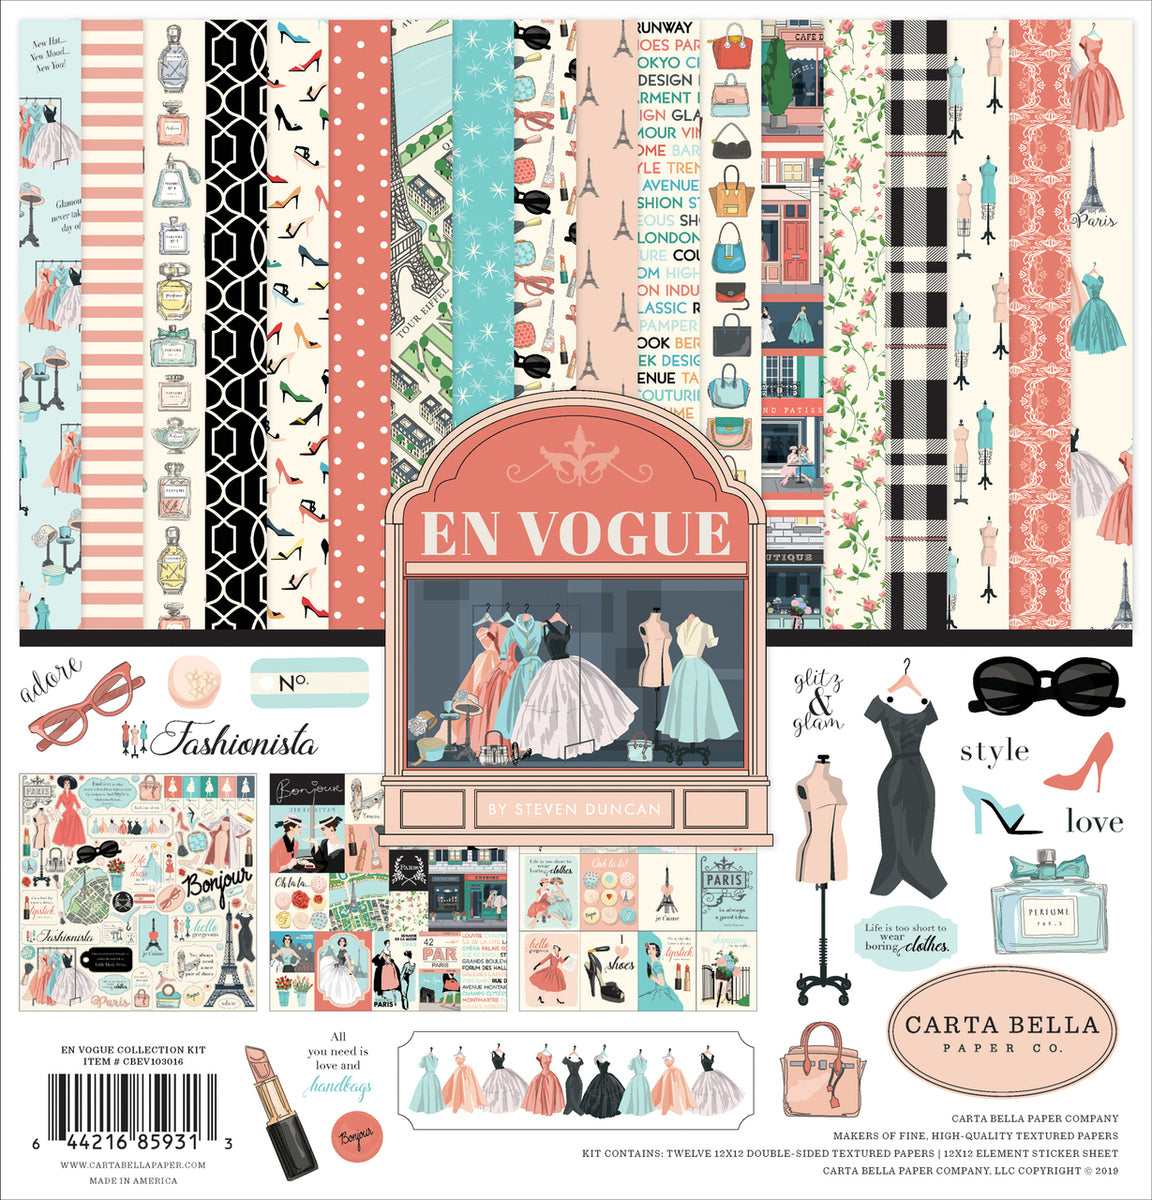 En Vogue 12x12 collection kit with focus on fashion - Carta Bella Paper 